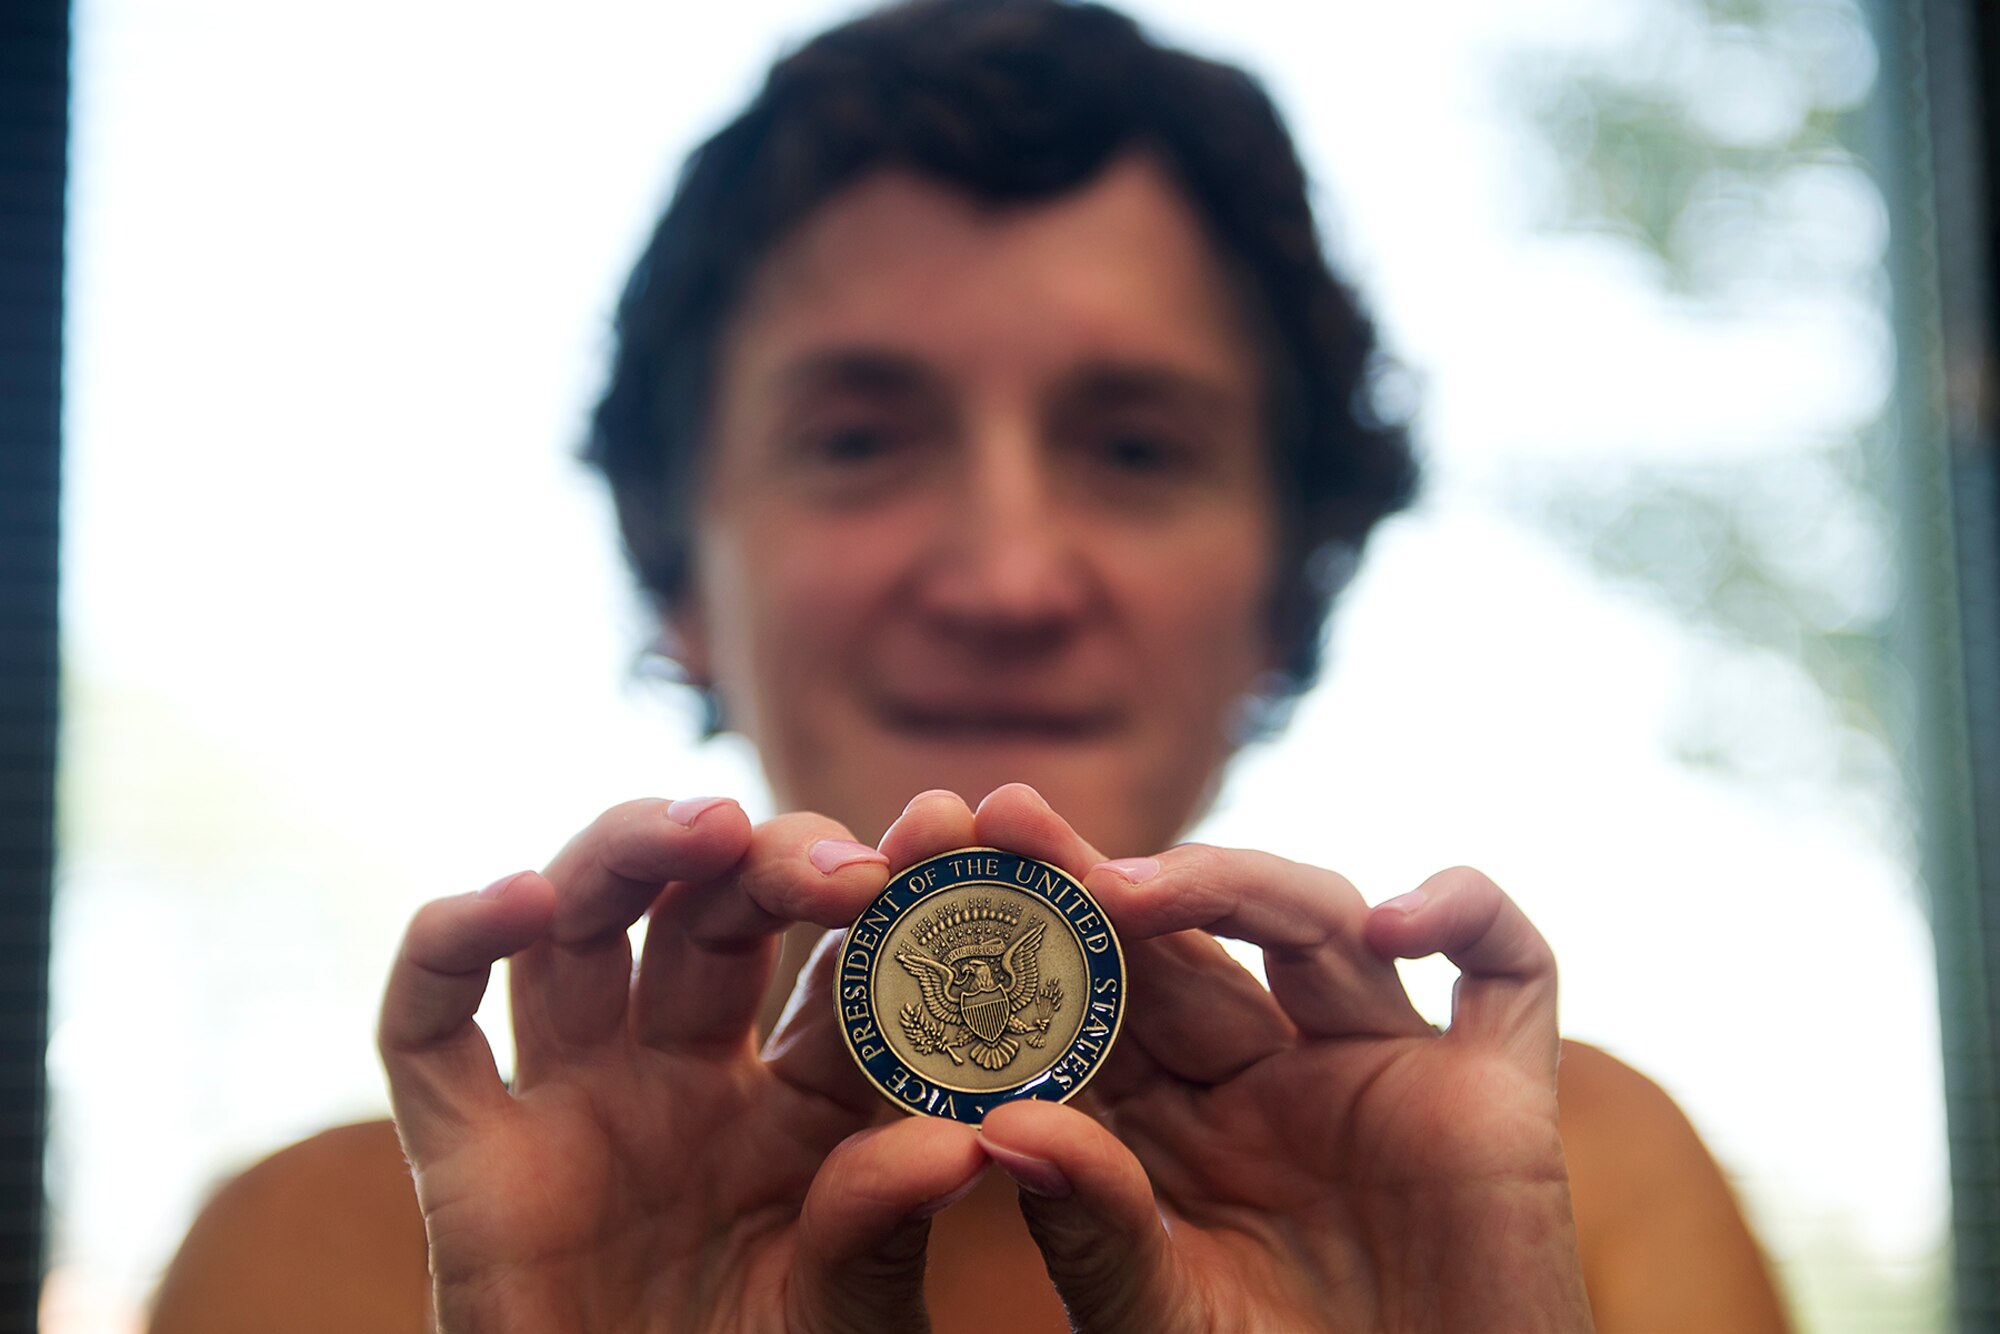 Linda Ambard, a violence prevention integrator assigned to the 509th Bomb Wing at Whiteman Air Force Base, Missouri, holds her Vice Presidential commemorative coin July 10, 2018.